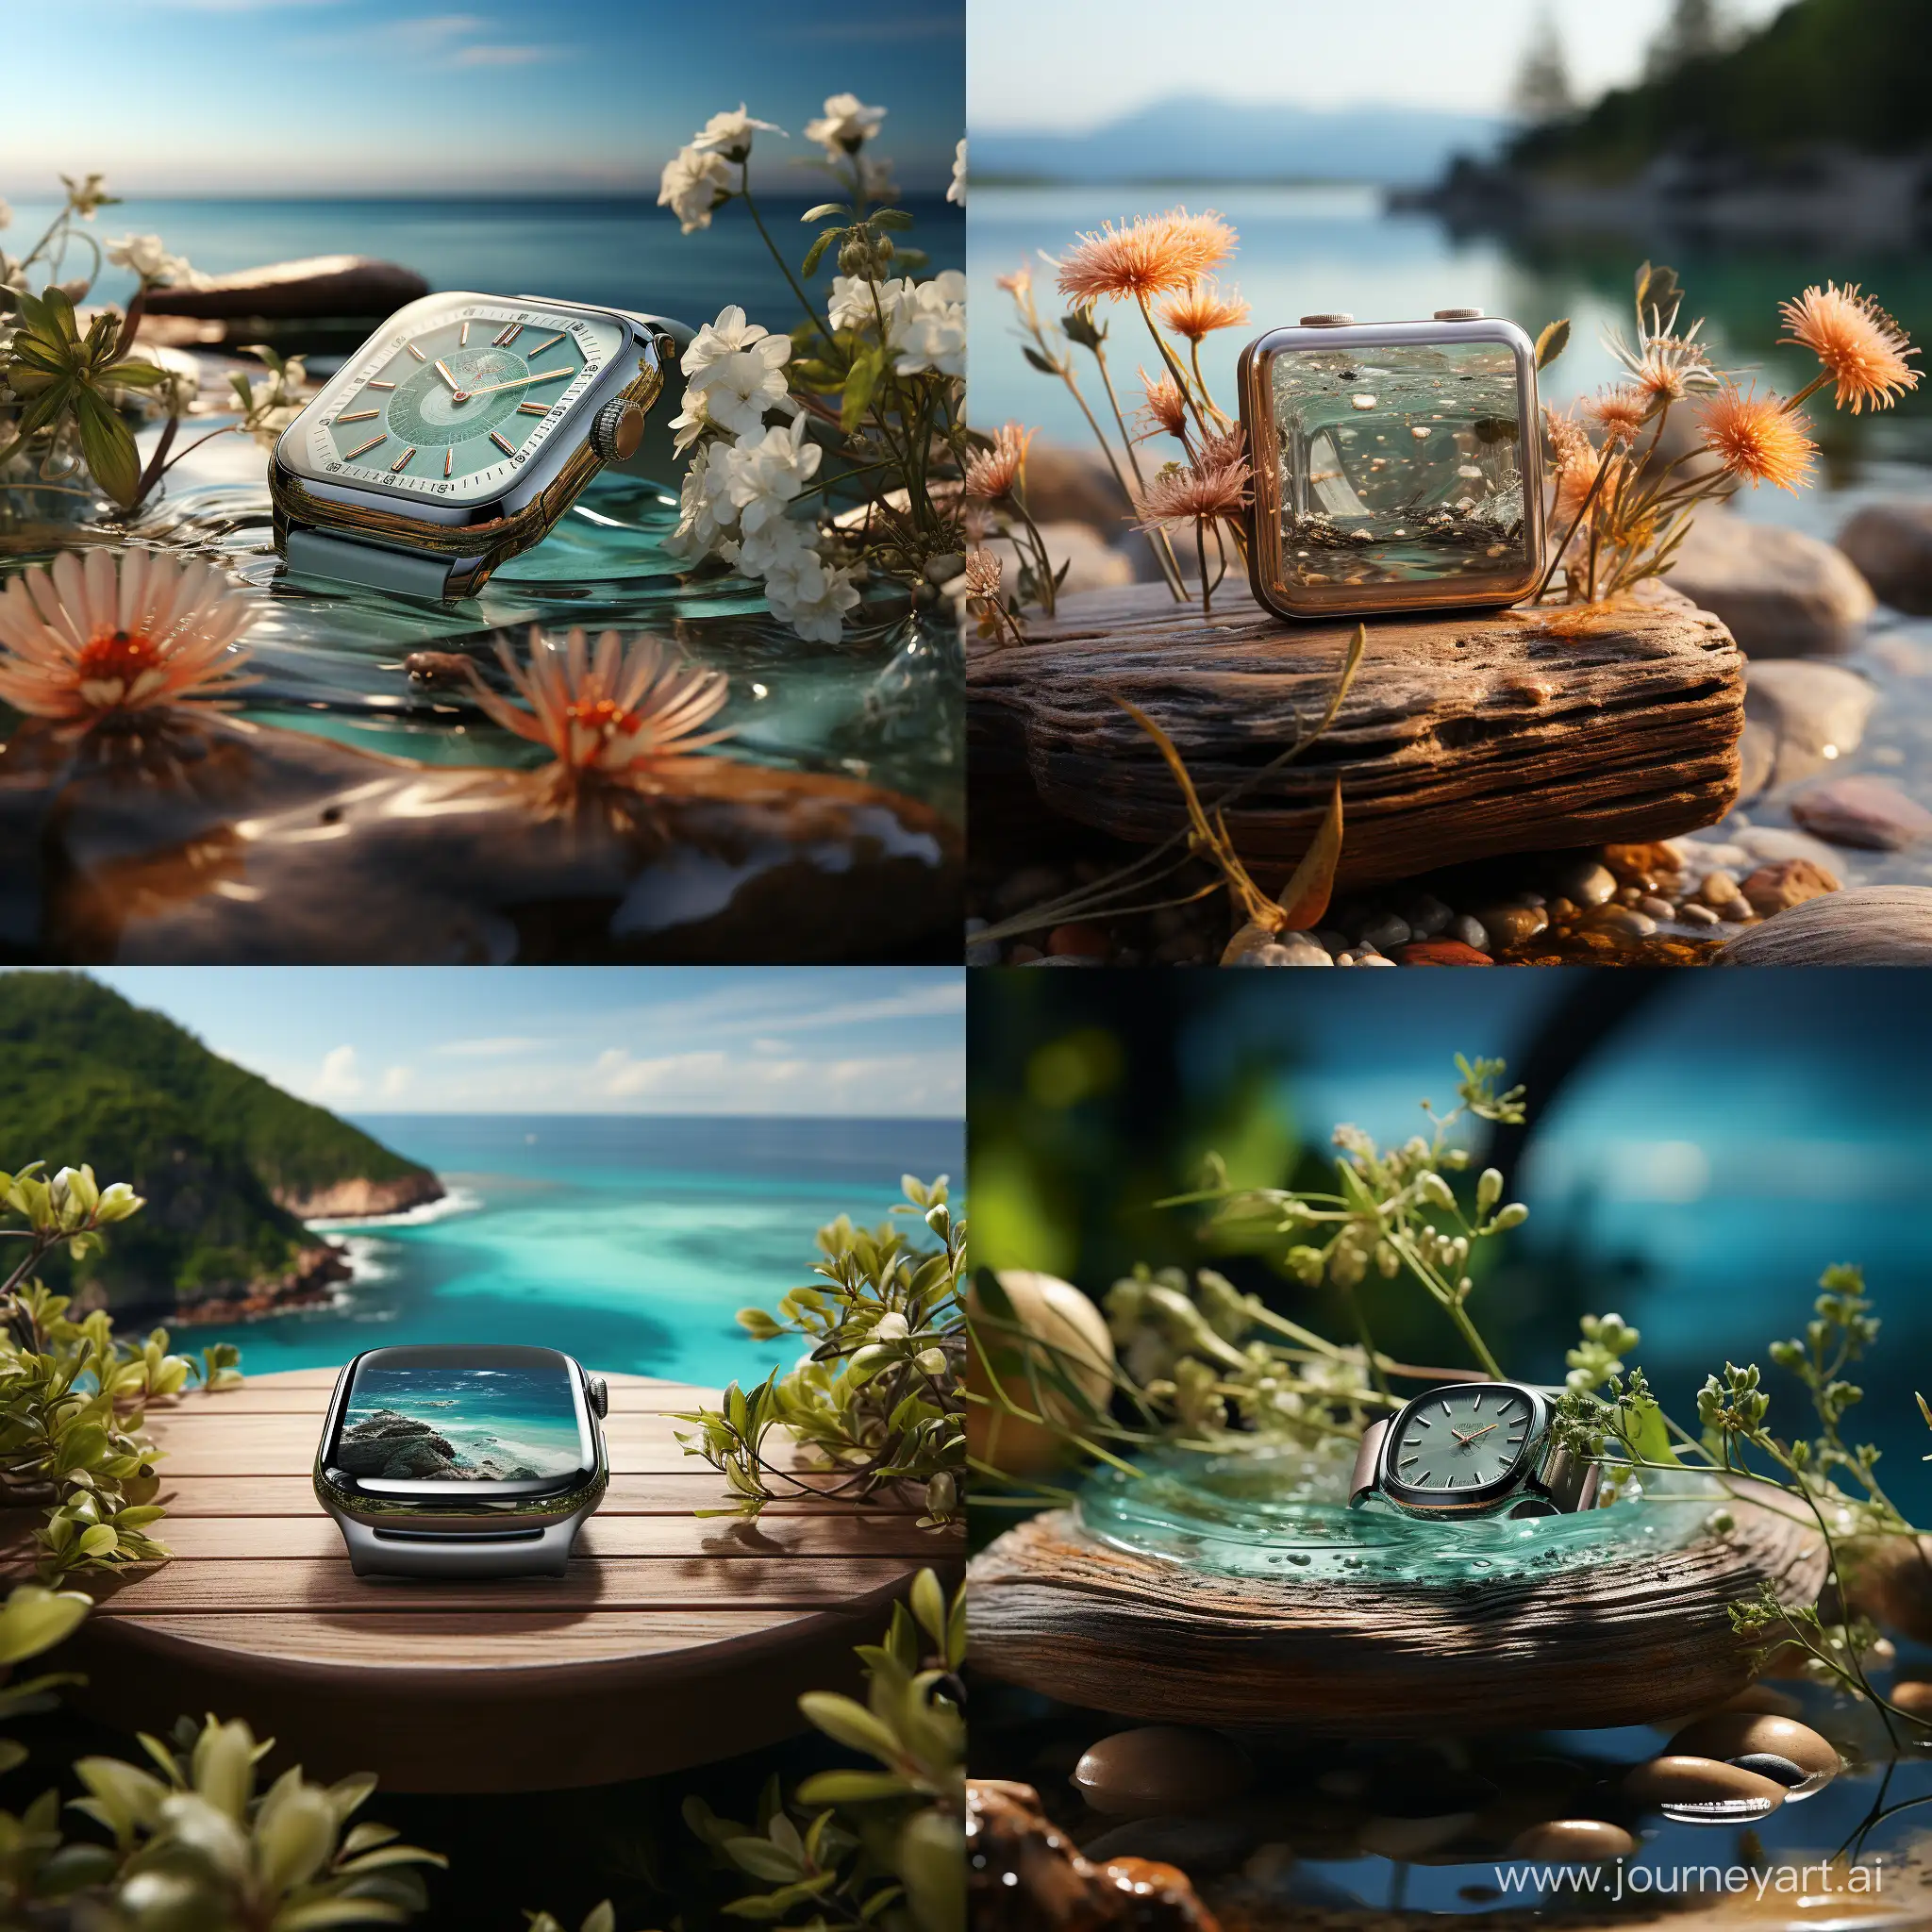 Smart-Watch-Displaying-Sea-and-Nature-Scenes-on-Minimalist-Stage